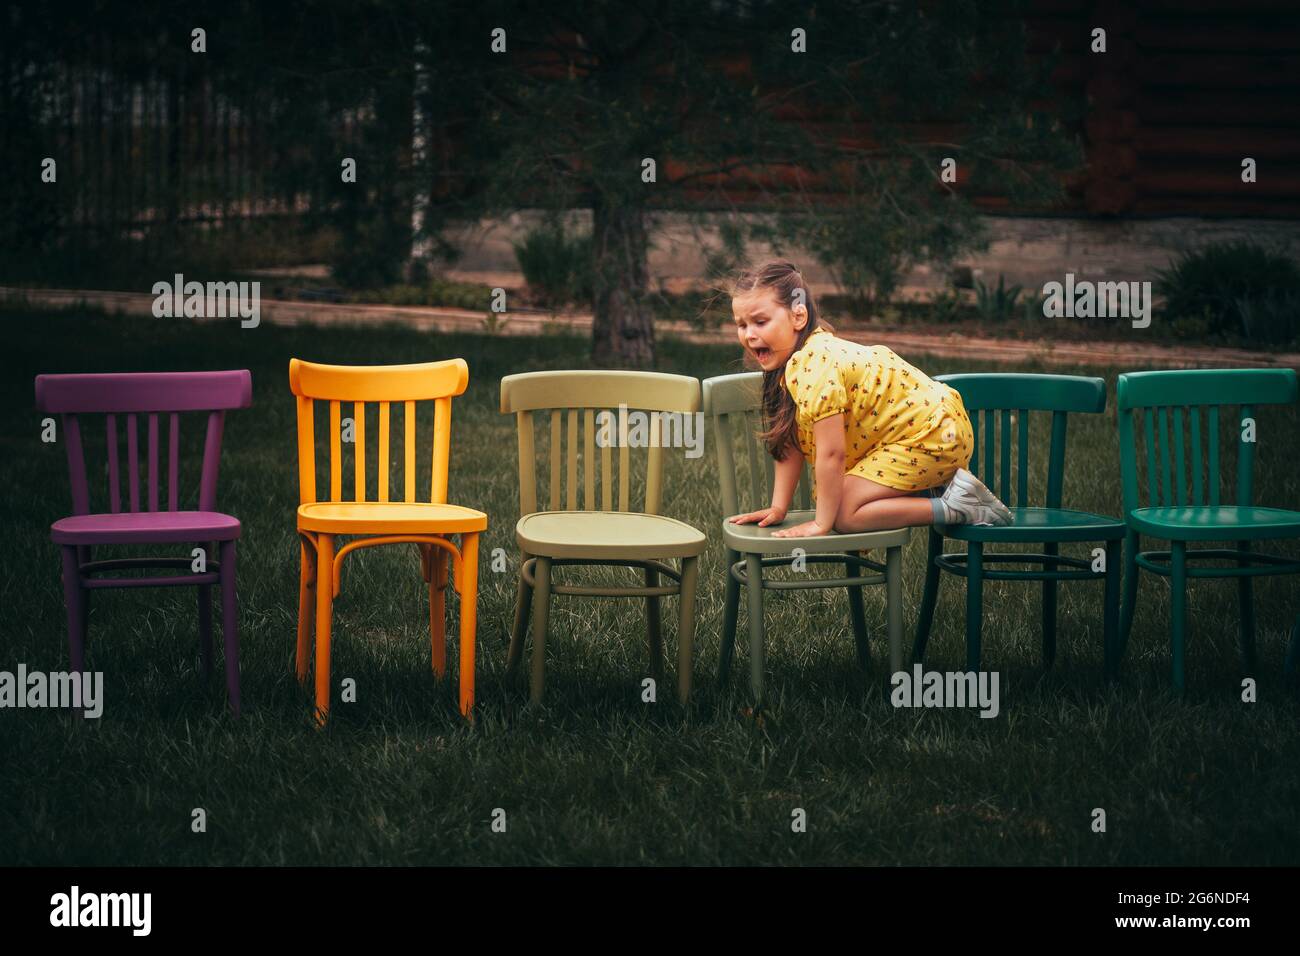 a frightened girl climbed with her feet on chairs and screams in horror after seeing something terrible in the grass in the backyard in the village Stock Photo